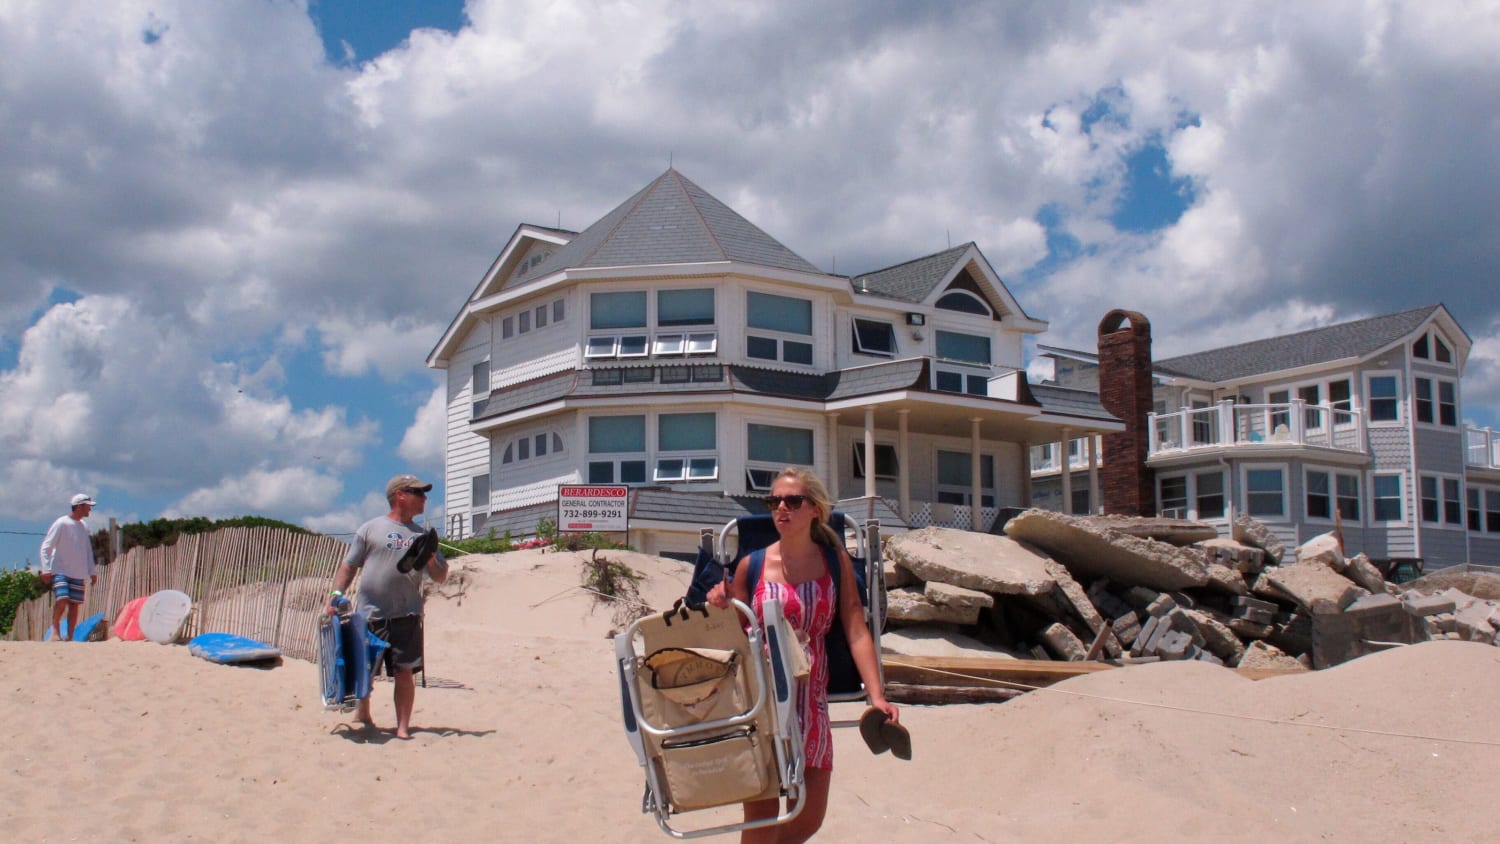 N.J. governor says public beaches on Jersey Shore must reopen to everyone, not just residents